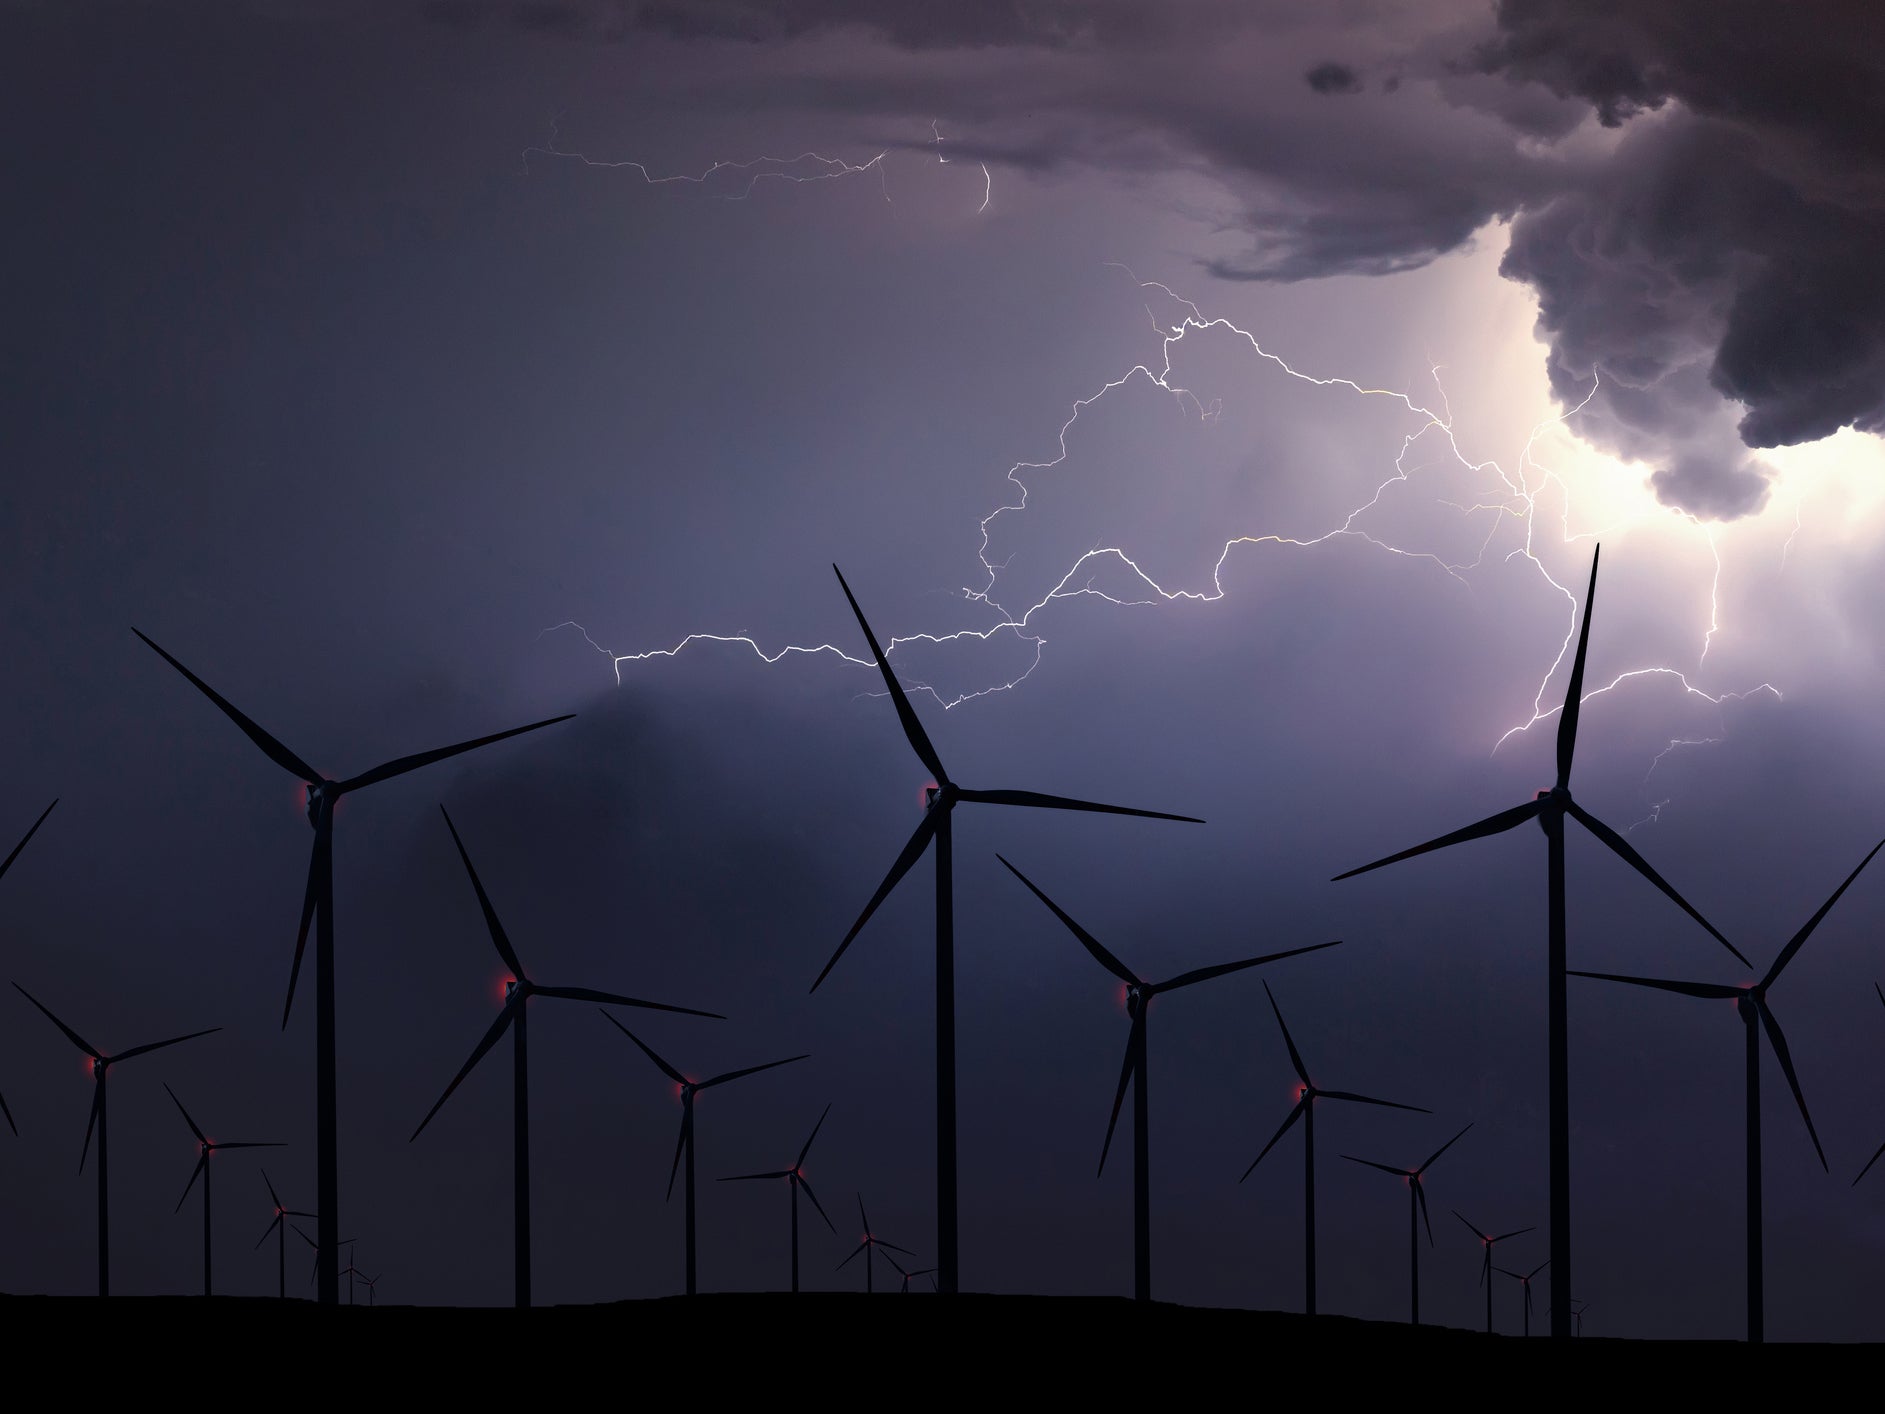 Storms saw wind power provide over 40 per cent of the UK's power during the windiest days in February